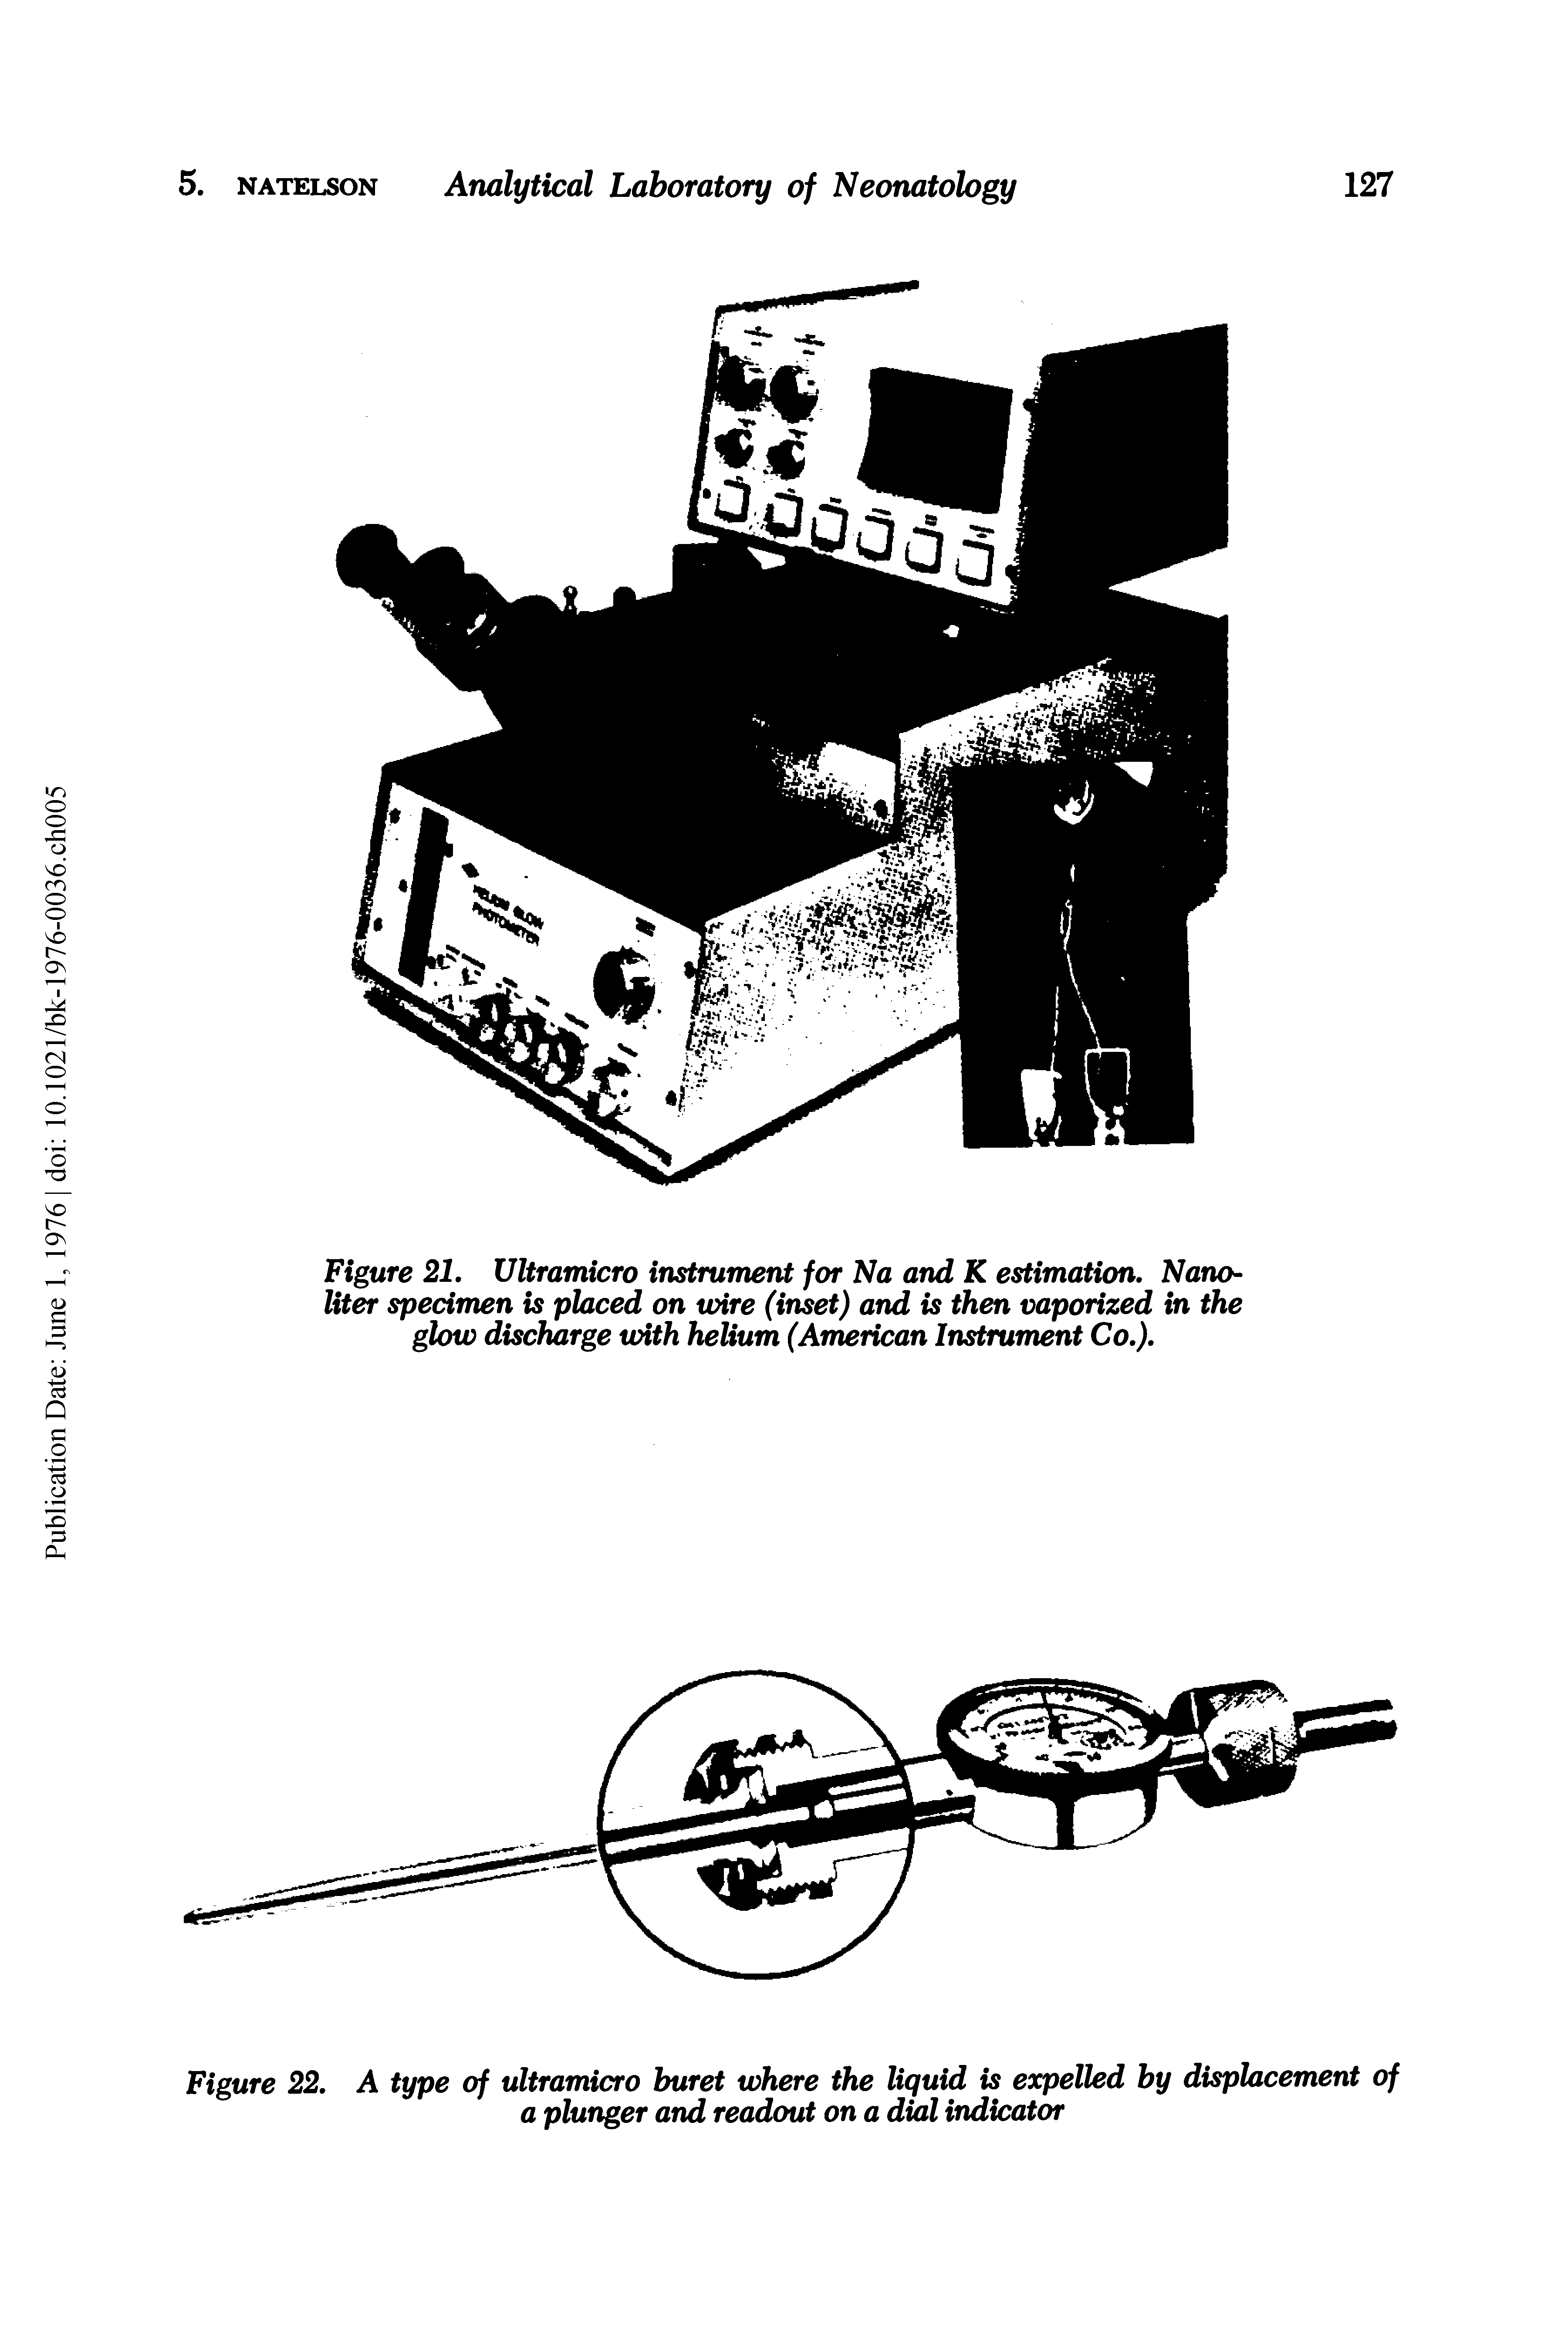 Figure 21, Ultramicro instrument for Na and K estimation. Nanoliter specimen is placed on wire (inset) and is then vaporized in the glow discharge with helium (American Instrument Co,),...